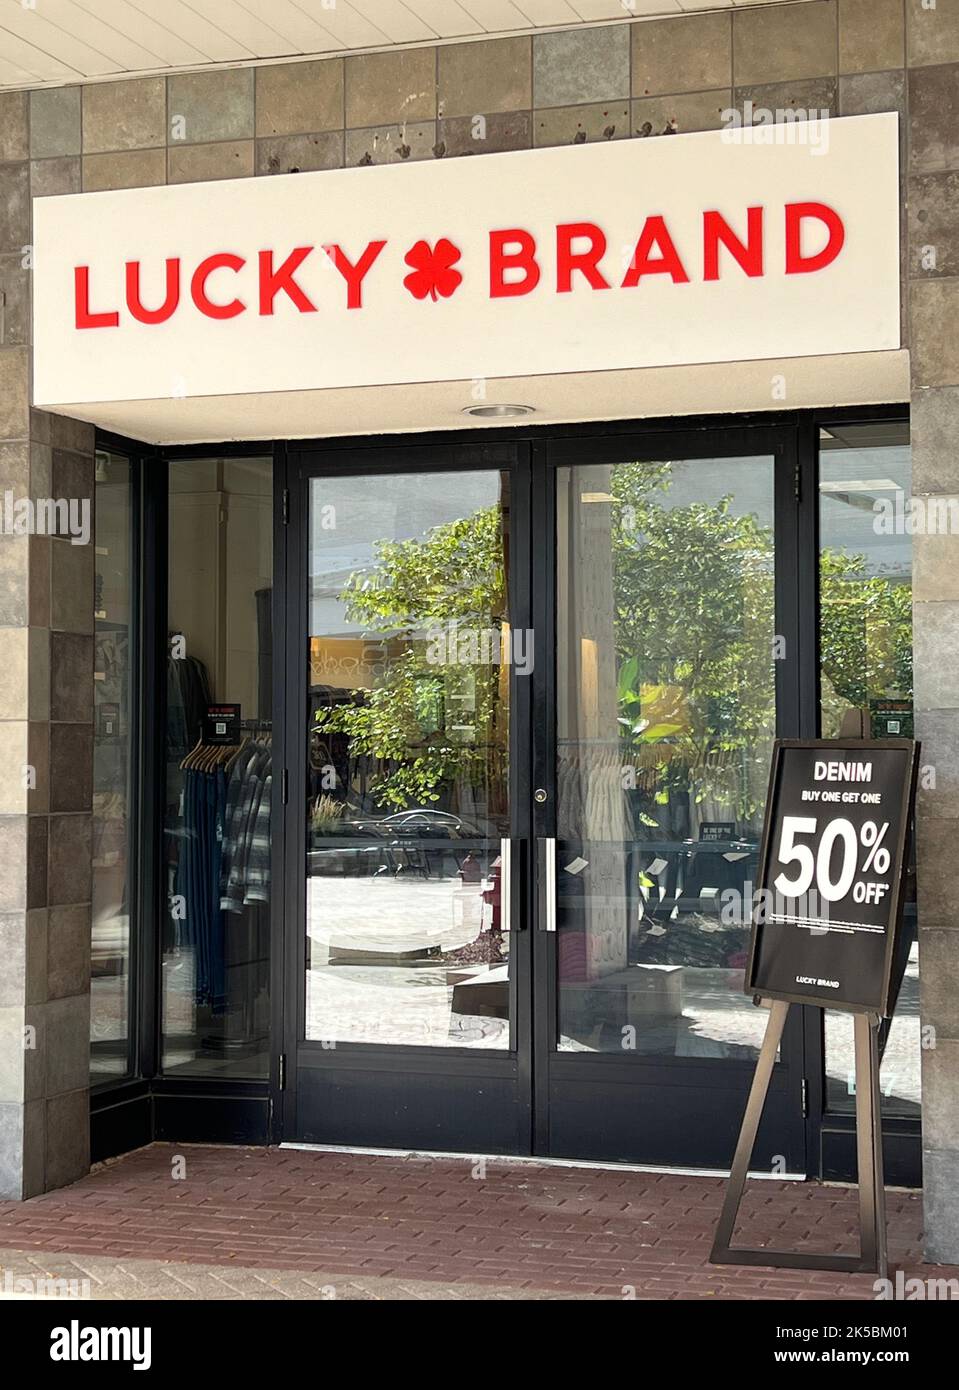 https://c8.alamy.com/comp/2K5BM01/front-entrance-of-a-lucky-brand-retail-store-in-old-orchard-shopping-center-in-skokie-illinois-2K5BM01.jpg